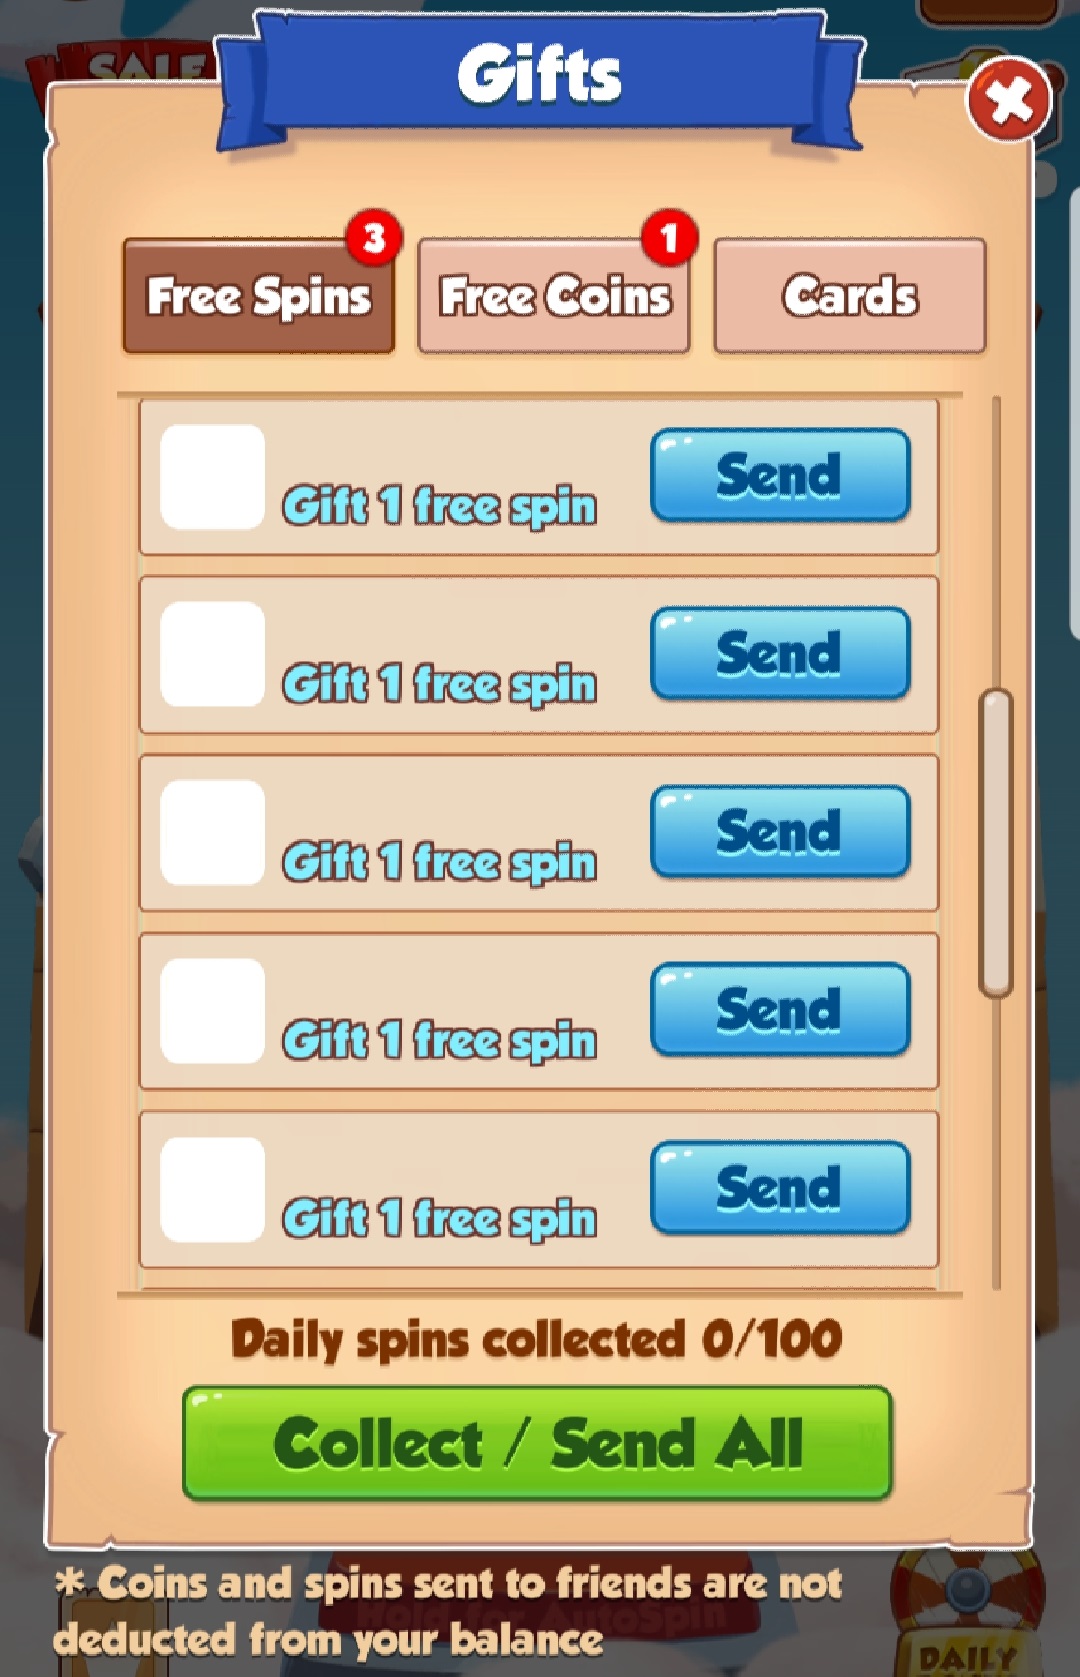 Today's Free Spins & Coins (Daily Coin Master Rewards )